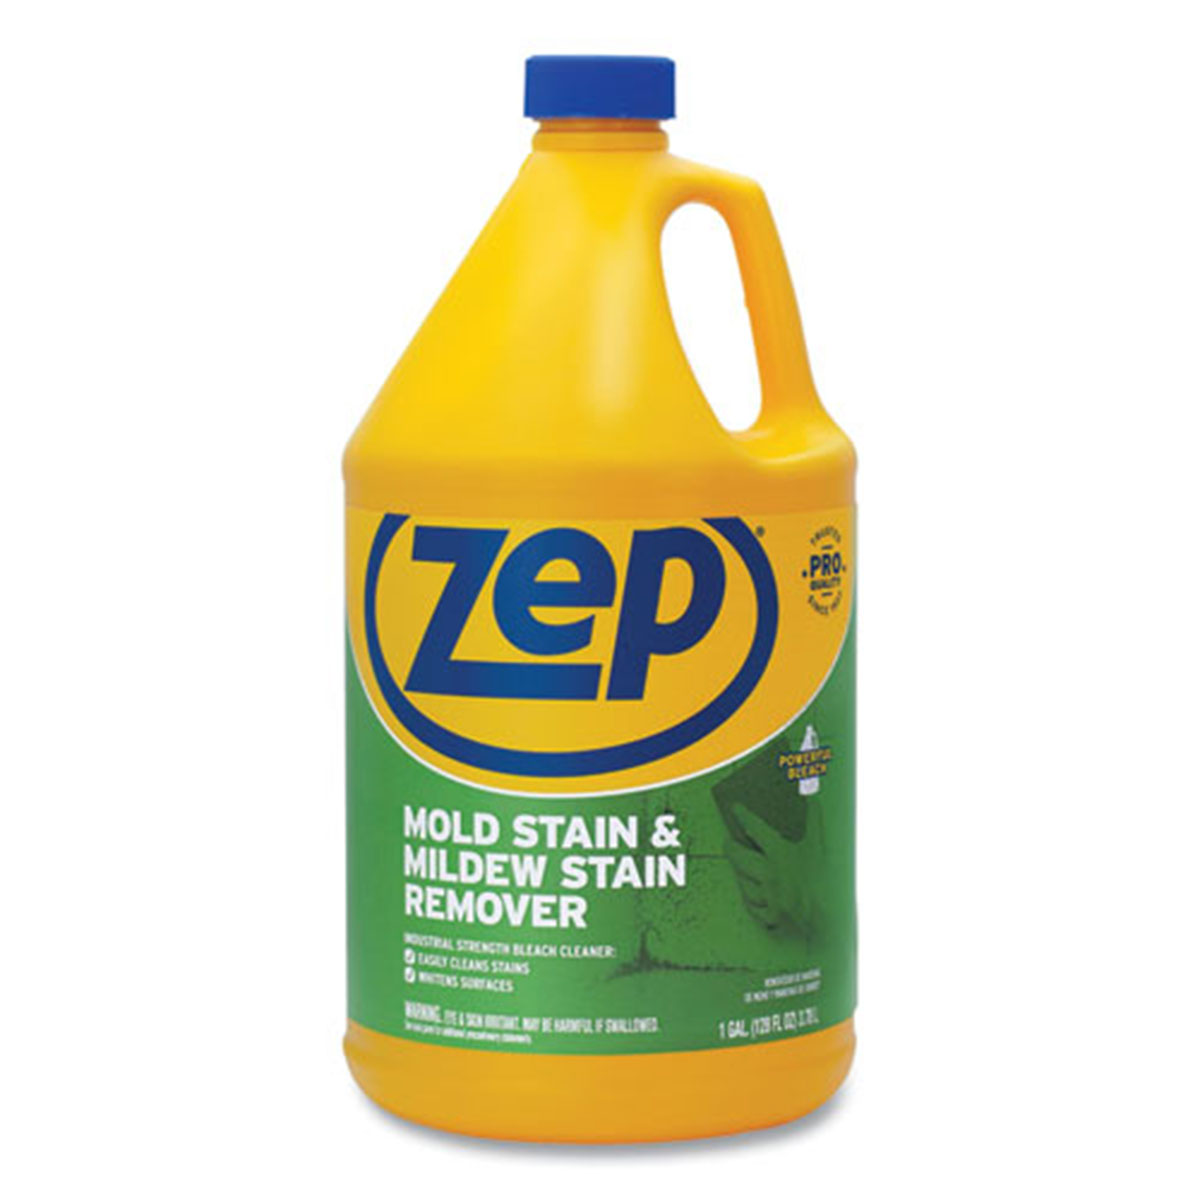 Zep Mold Stain and Mildew Stain Remover, 32 oz Spray Bottle, 12/Carton